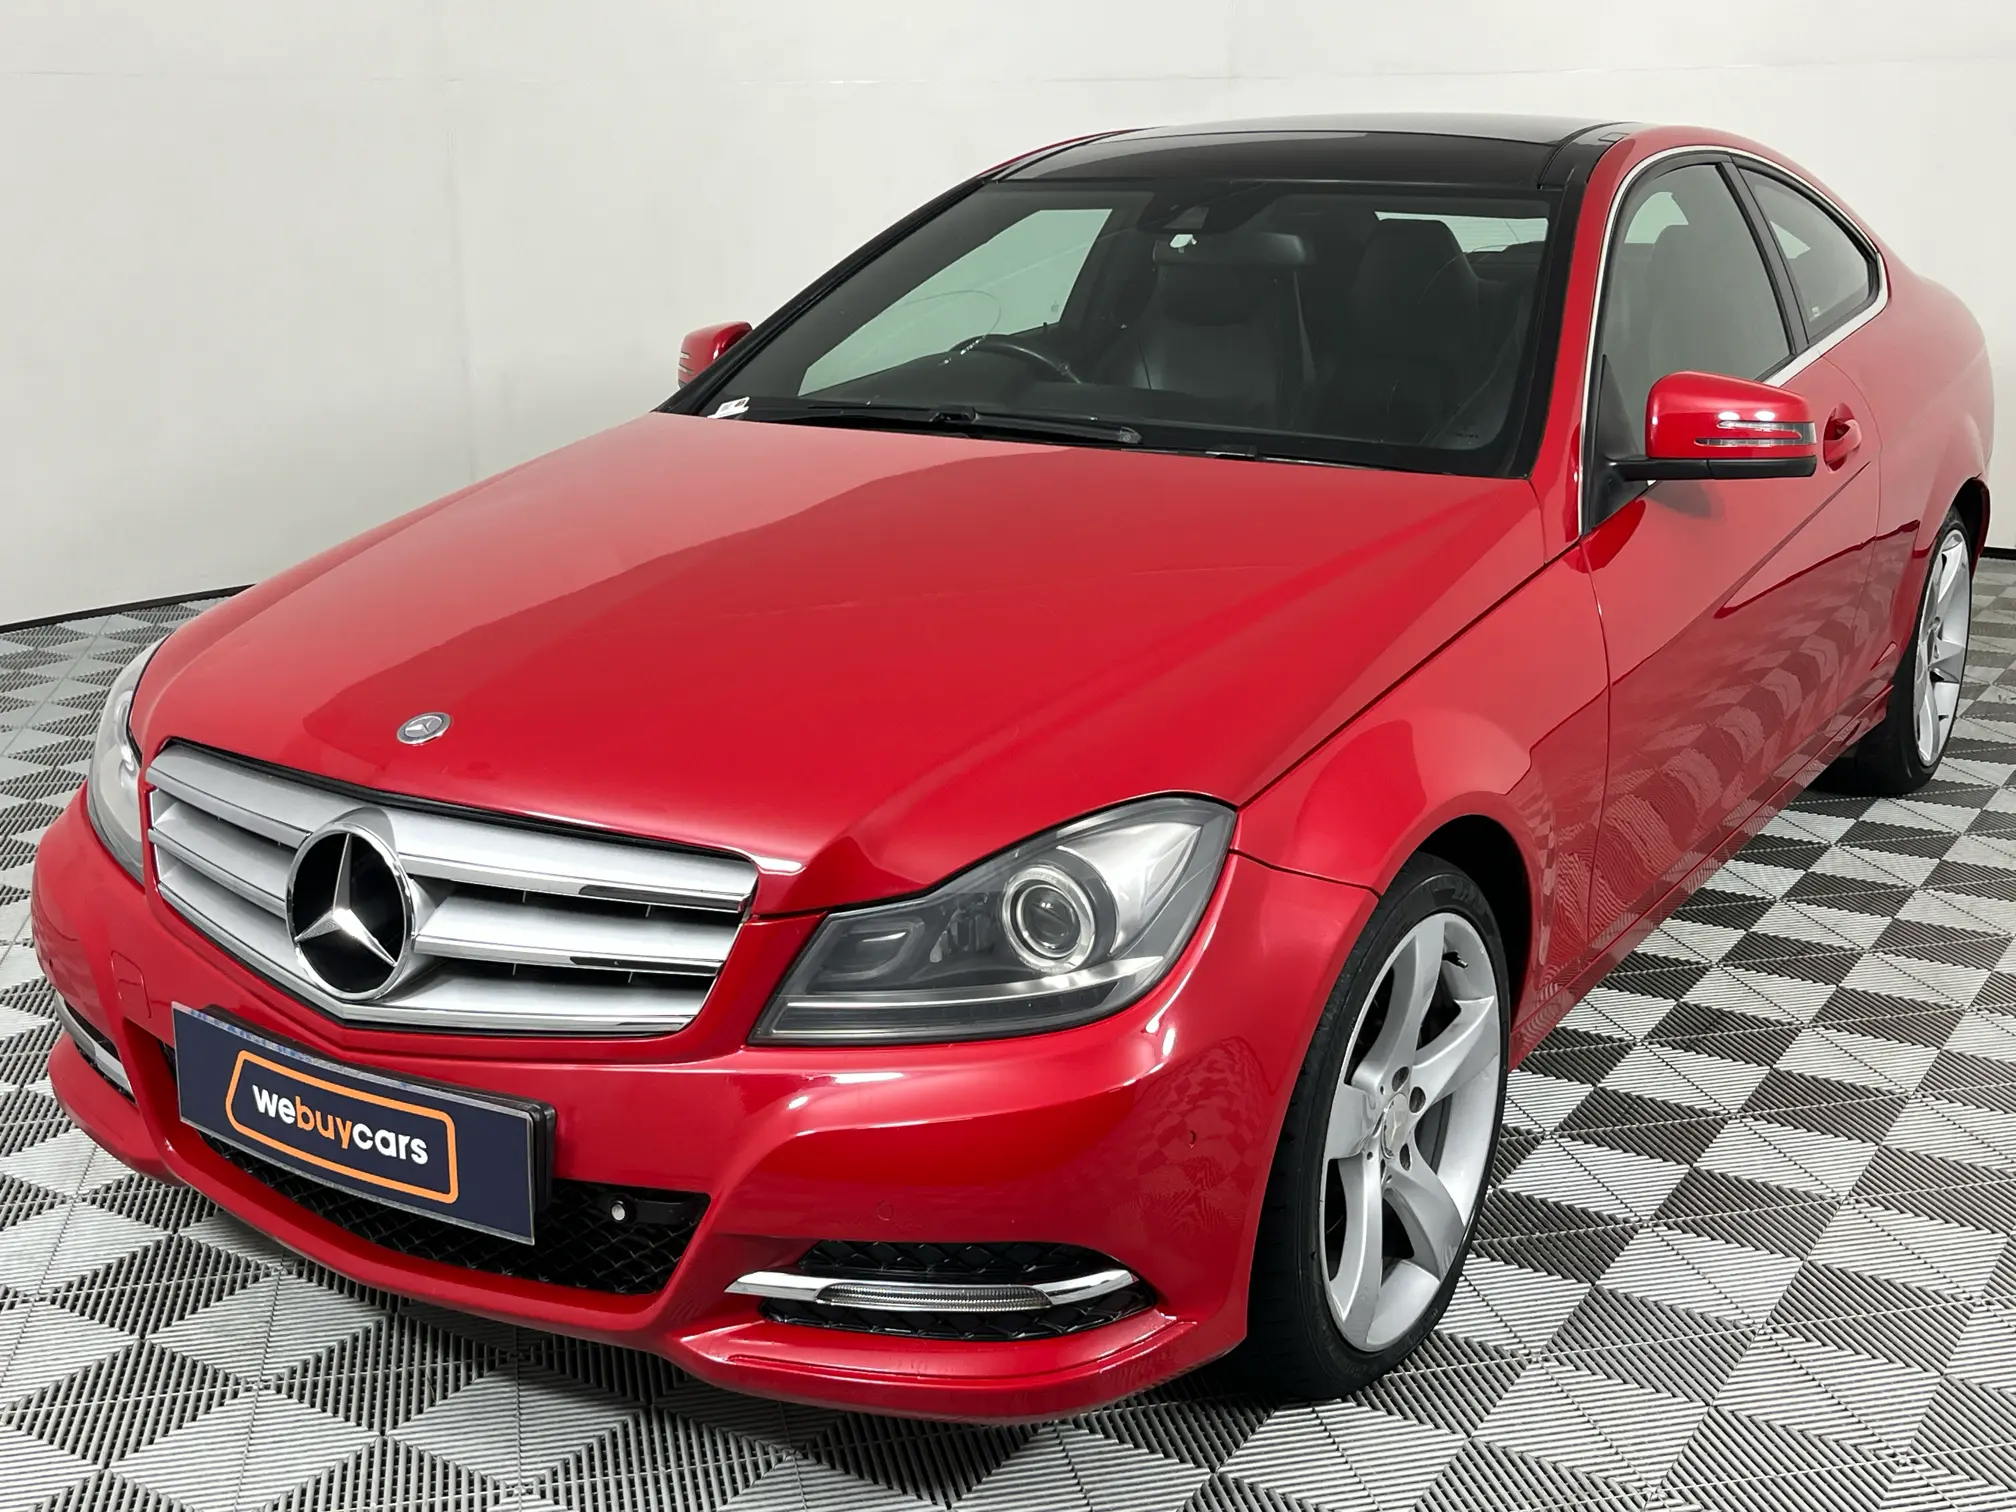 2013 Mercedes-Benz C Class Coupe C250 CDI BE Coupe Auto